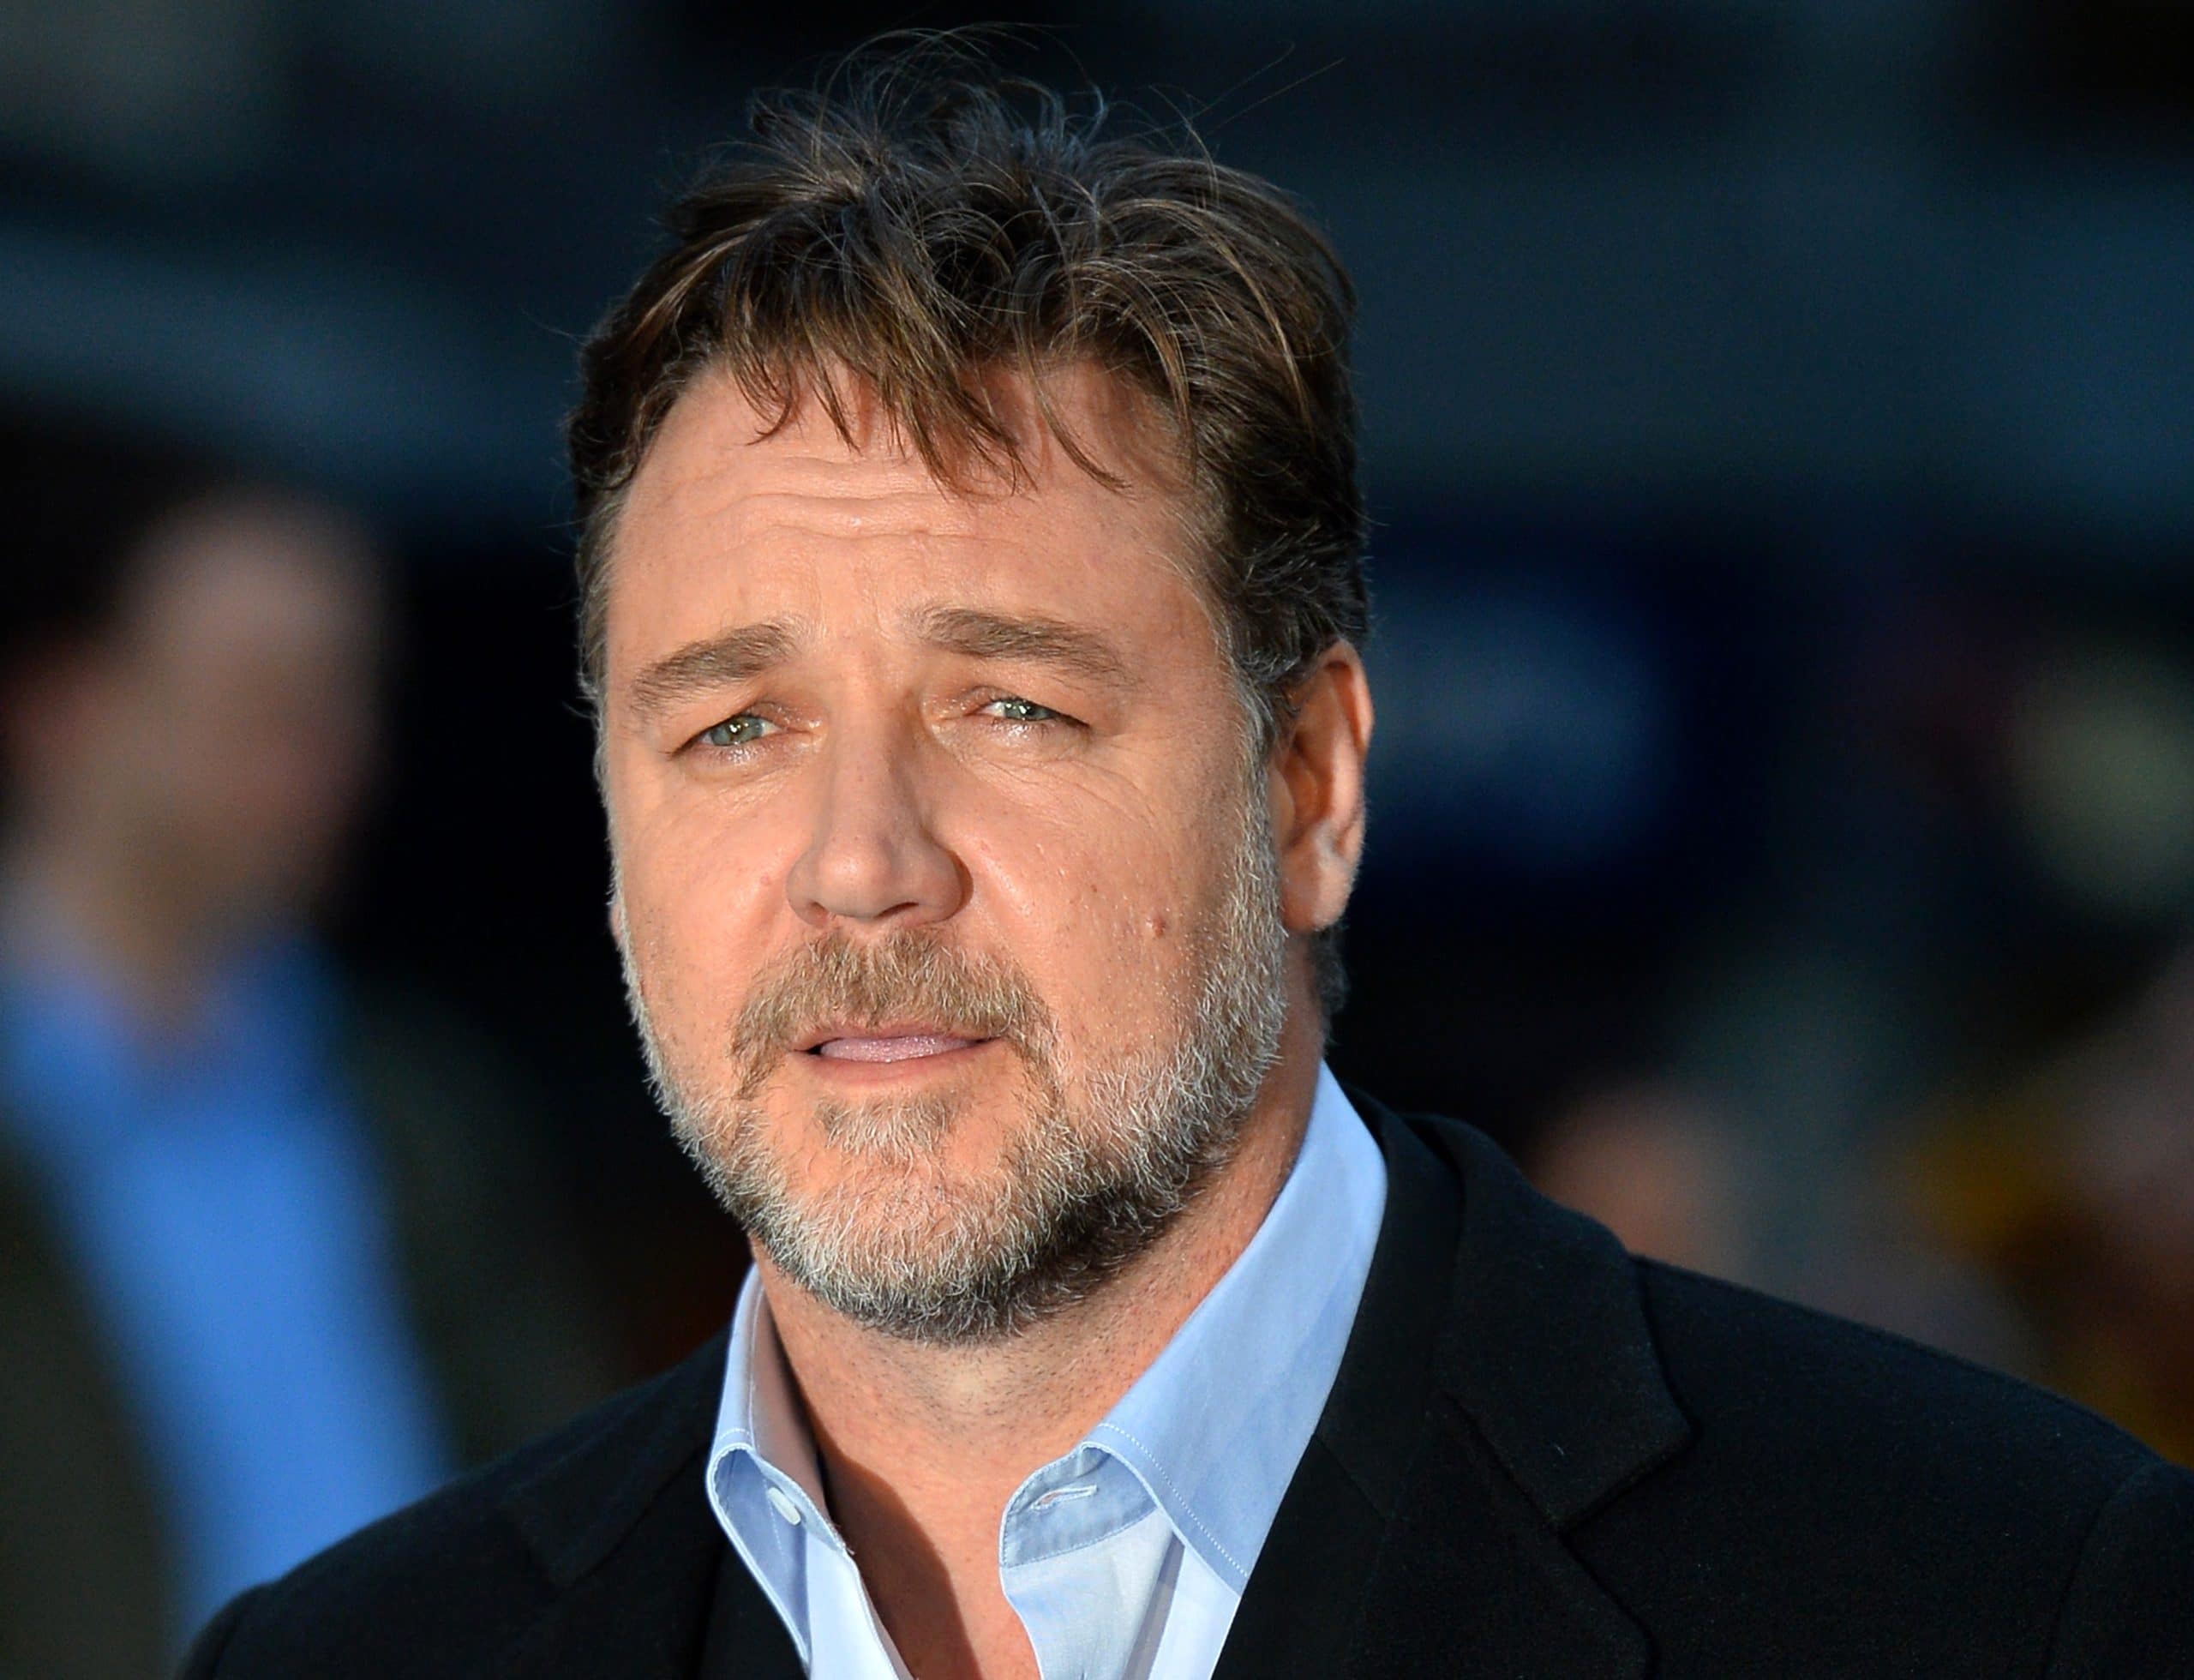 Russell Crowe New Zealand Actor, Musician, Producer